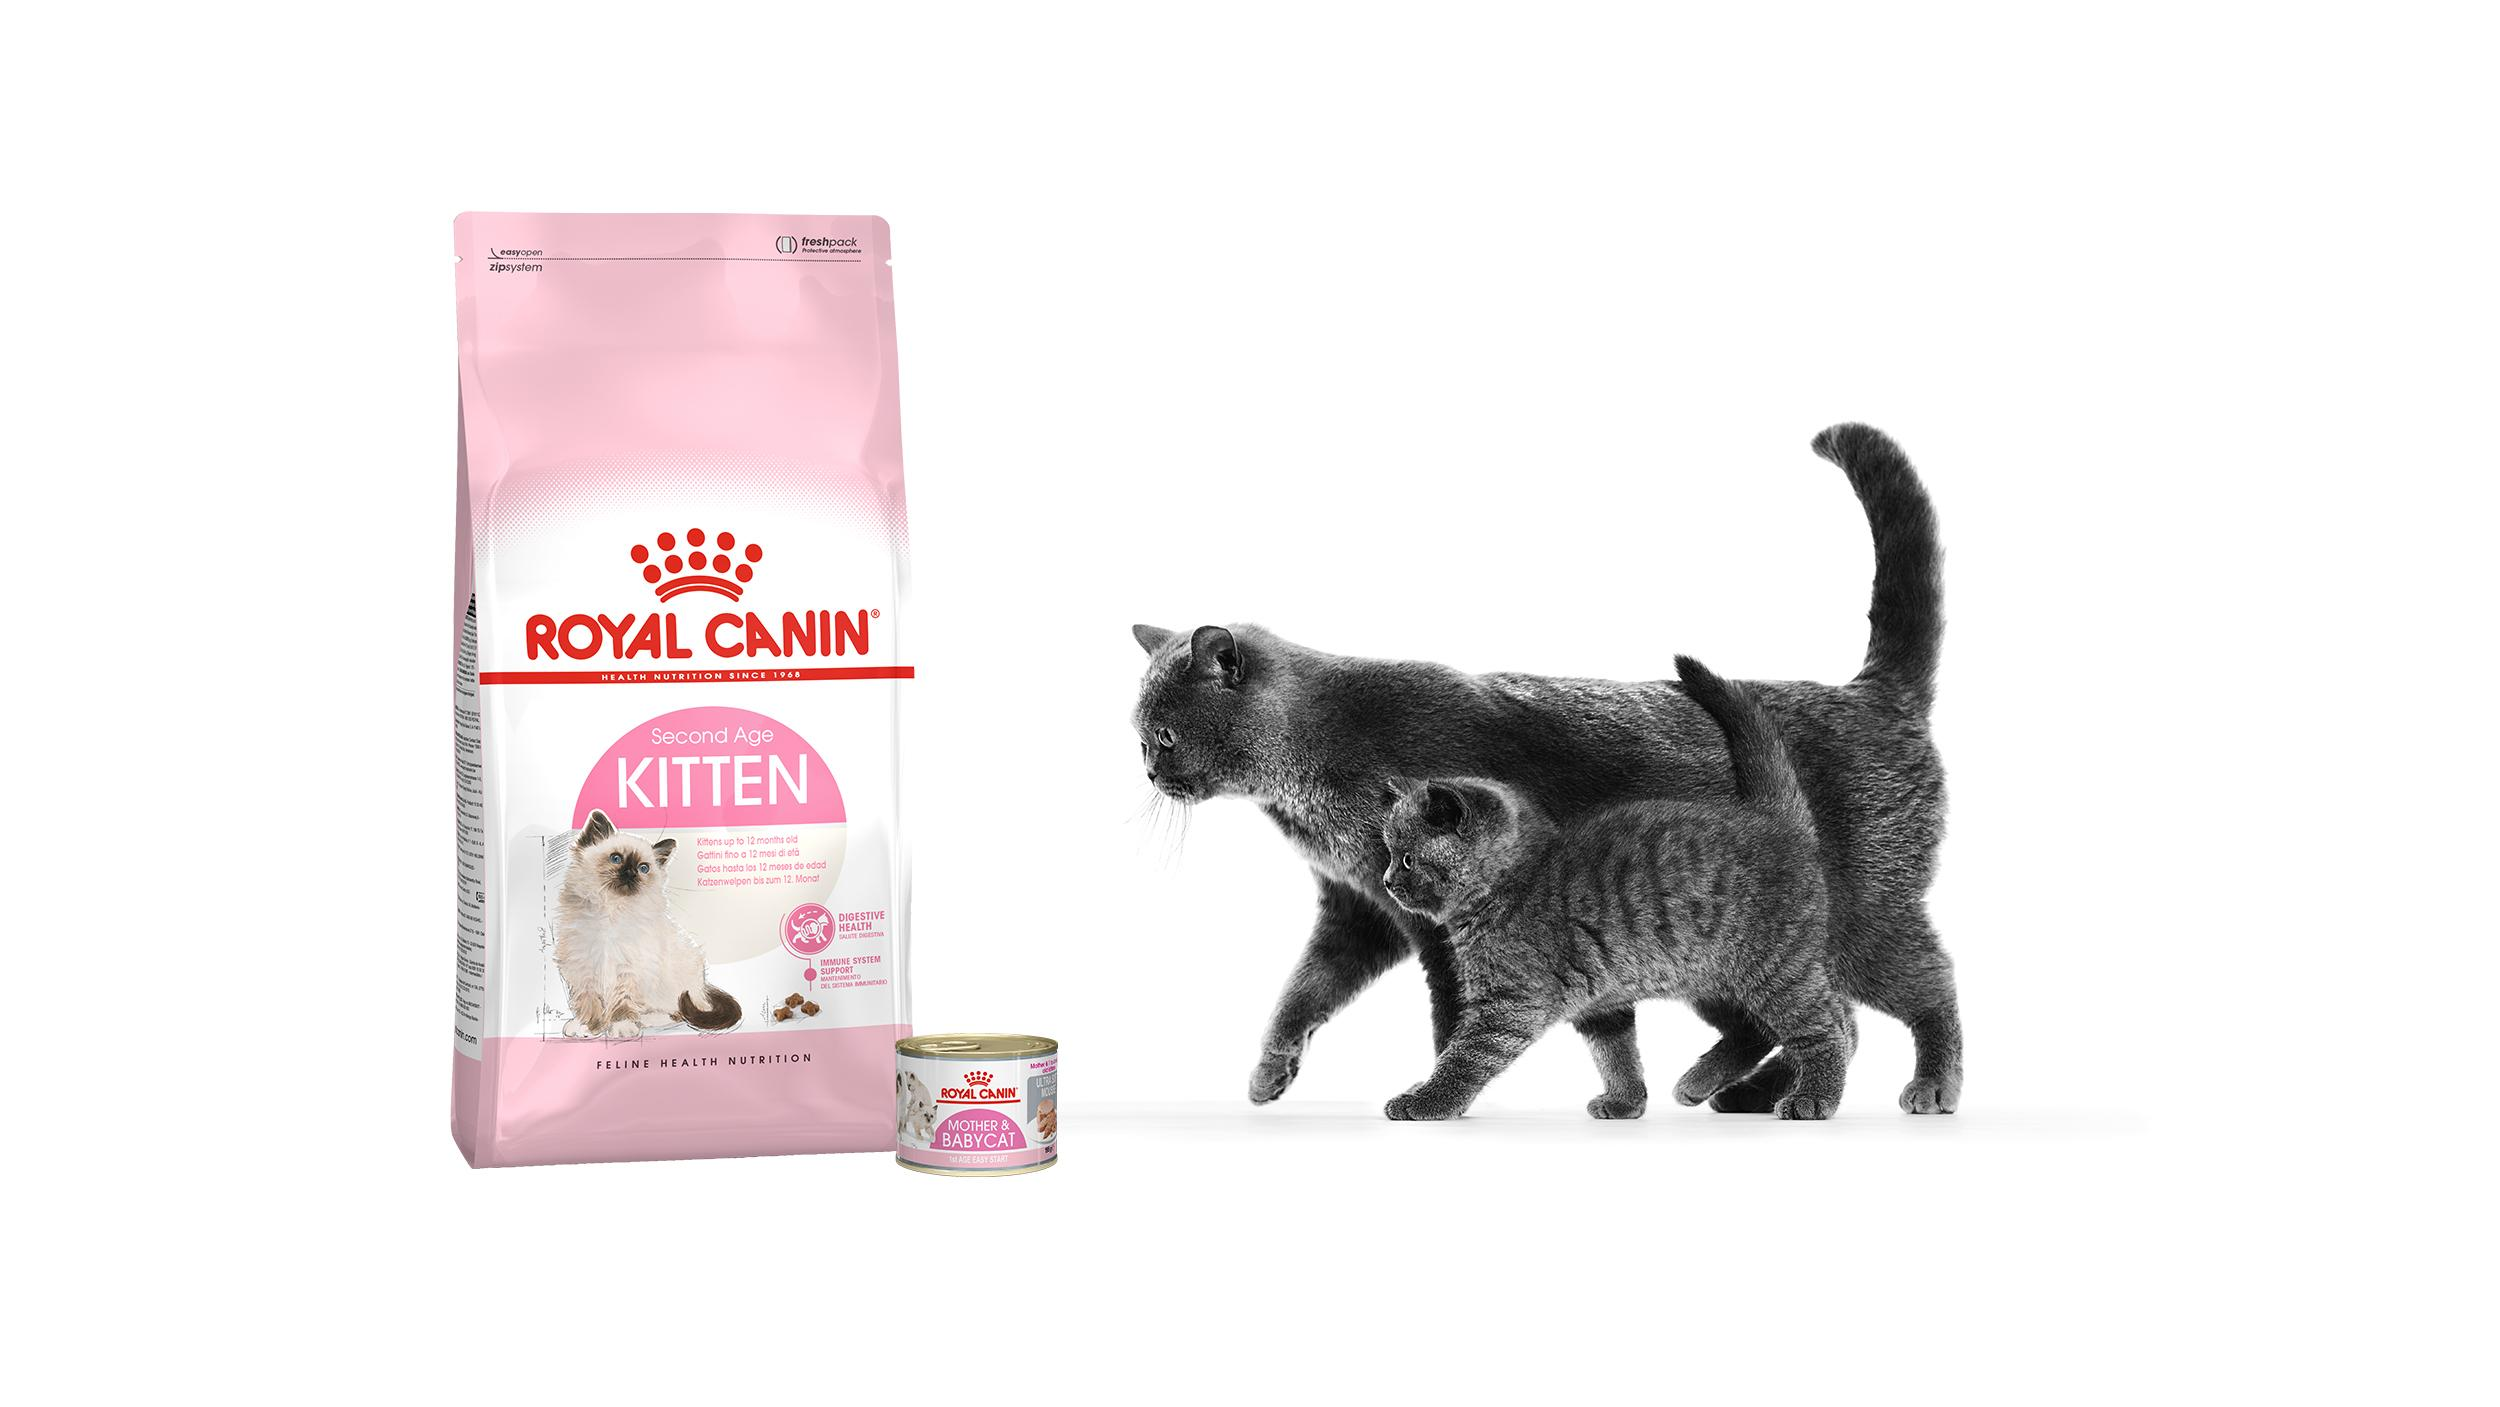 tailored nutrition for your kitten neonatal